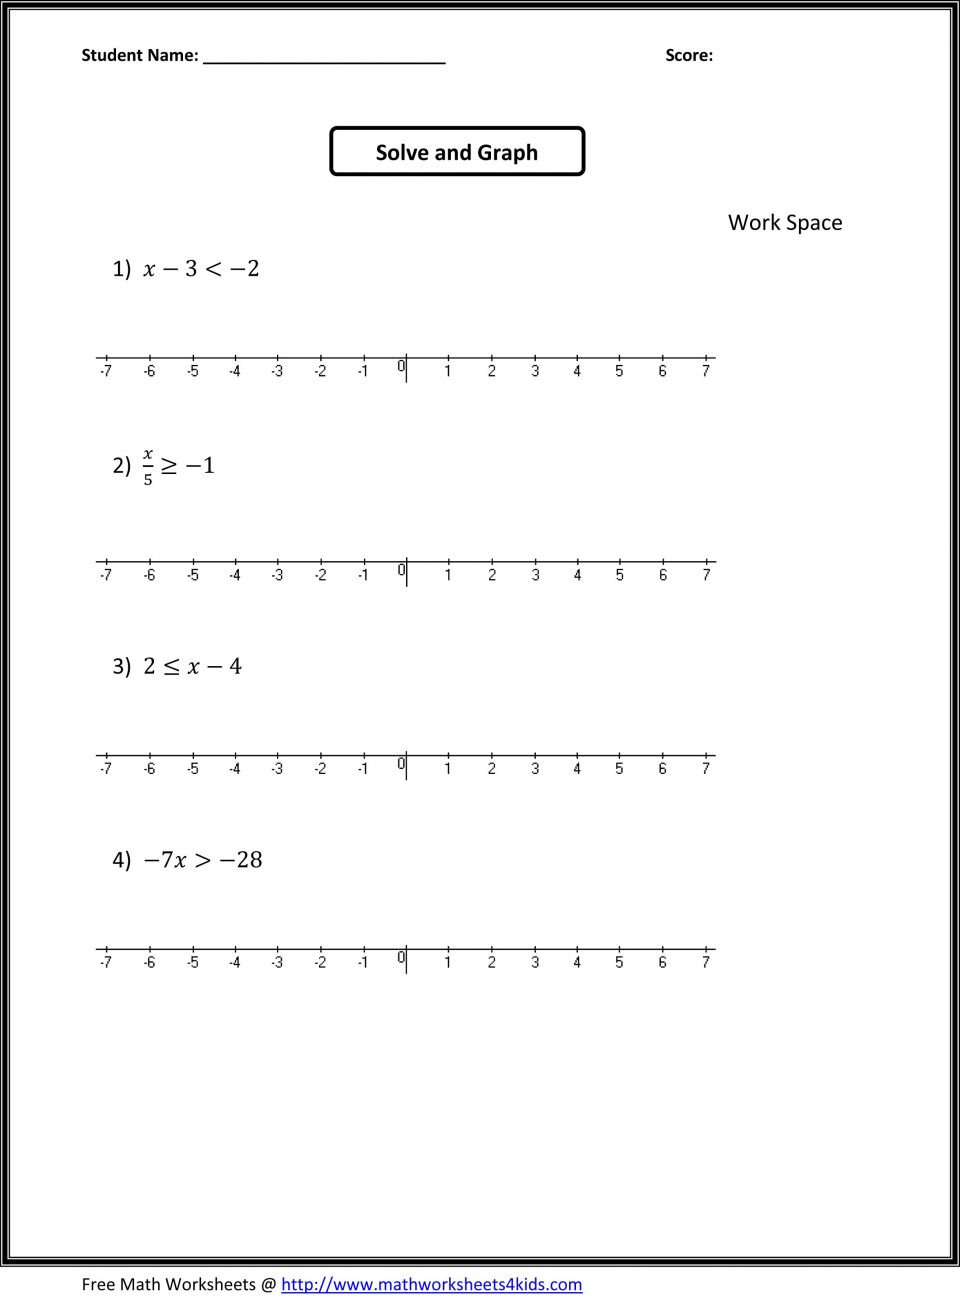 free-math-worksheets-for-7th-grade-with-answers-db-excel